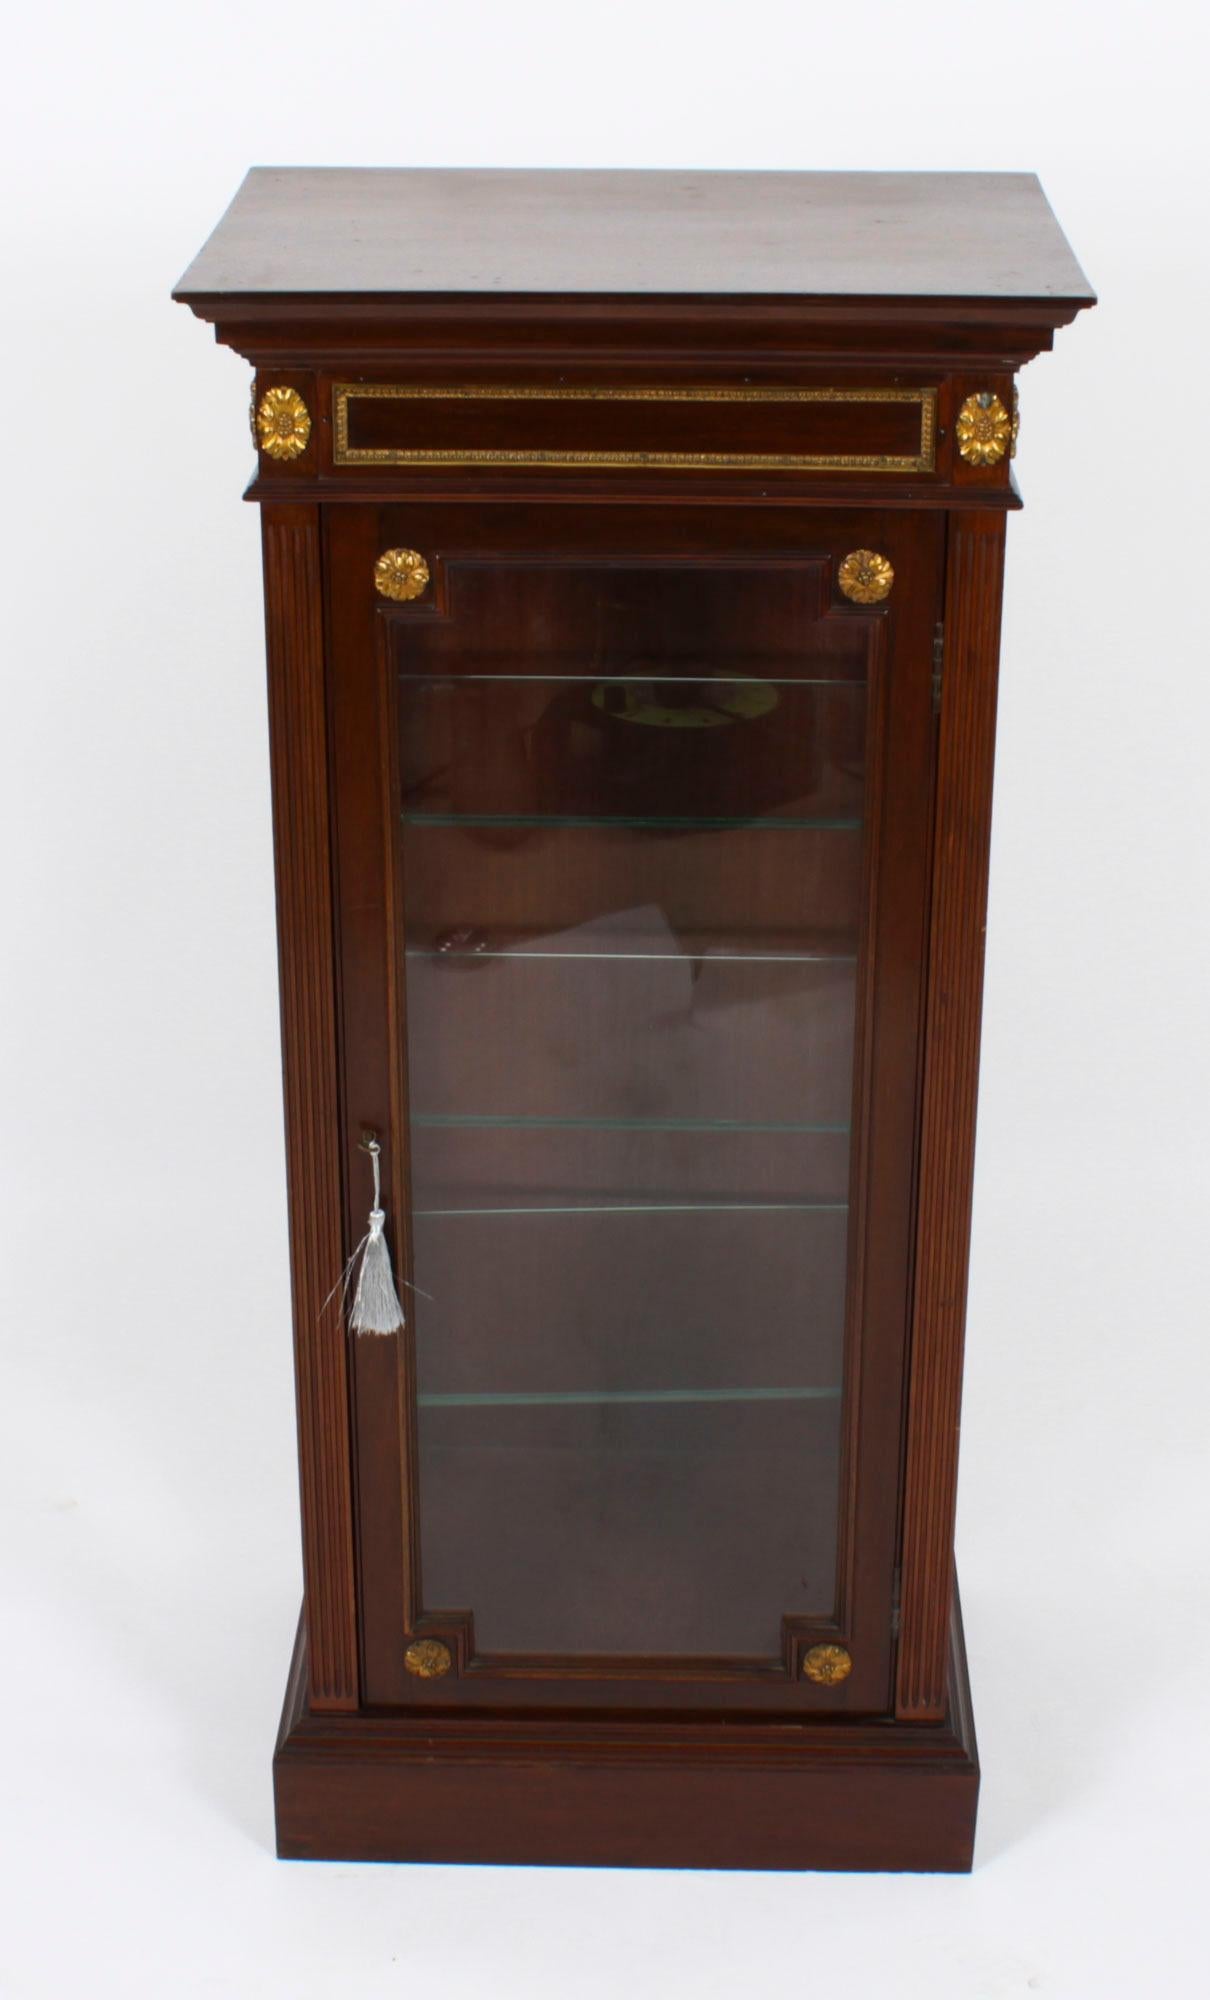 This is a beautiful antique French ormolu mounted mahogany vitrine, circa 1870 in date.
 
This beautiful cabinet is of slender form with gilt bronze ormolu mounts and a moulded cornice. The cornice sits above a glazed panelled door and glazed